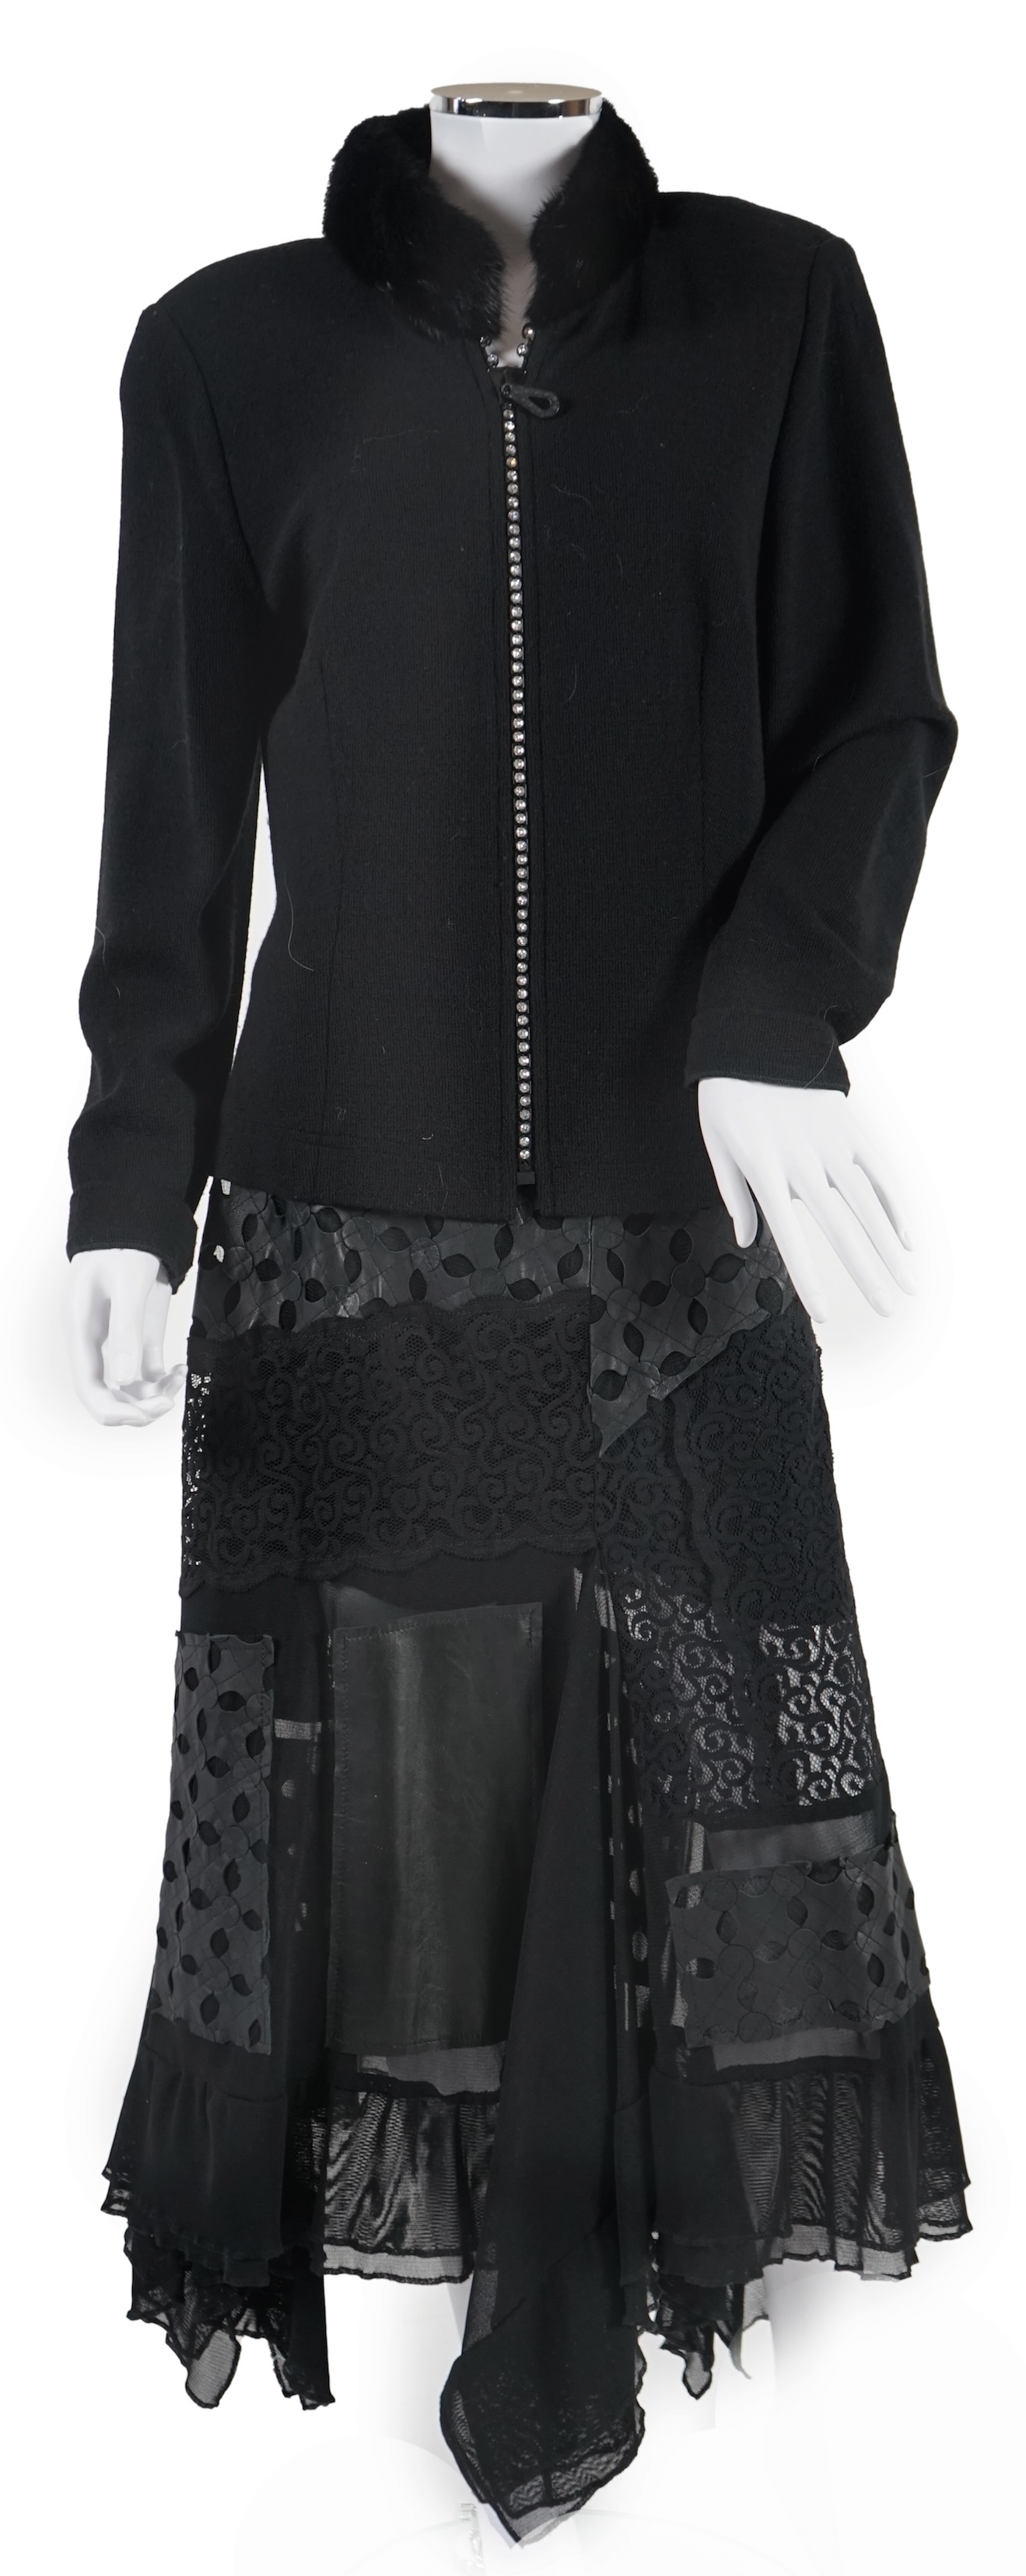 A Gloria Estelles black lady's knitted jacket with fur collar and diamonté detail and an Azur black leather and lace midi skirt. Size 16. Proceeds to Happy Paws Puppy Rescue